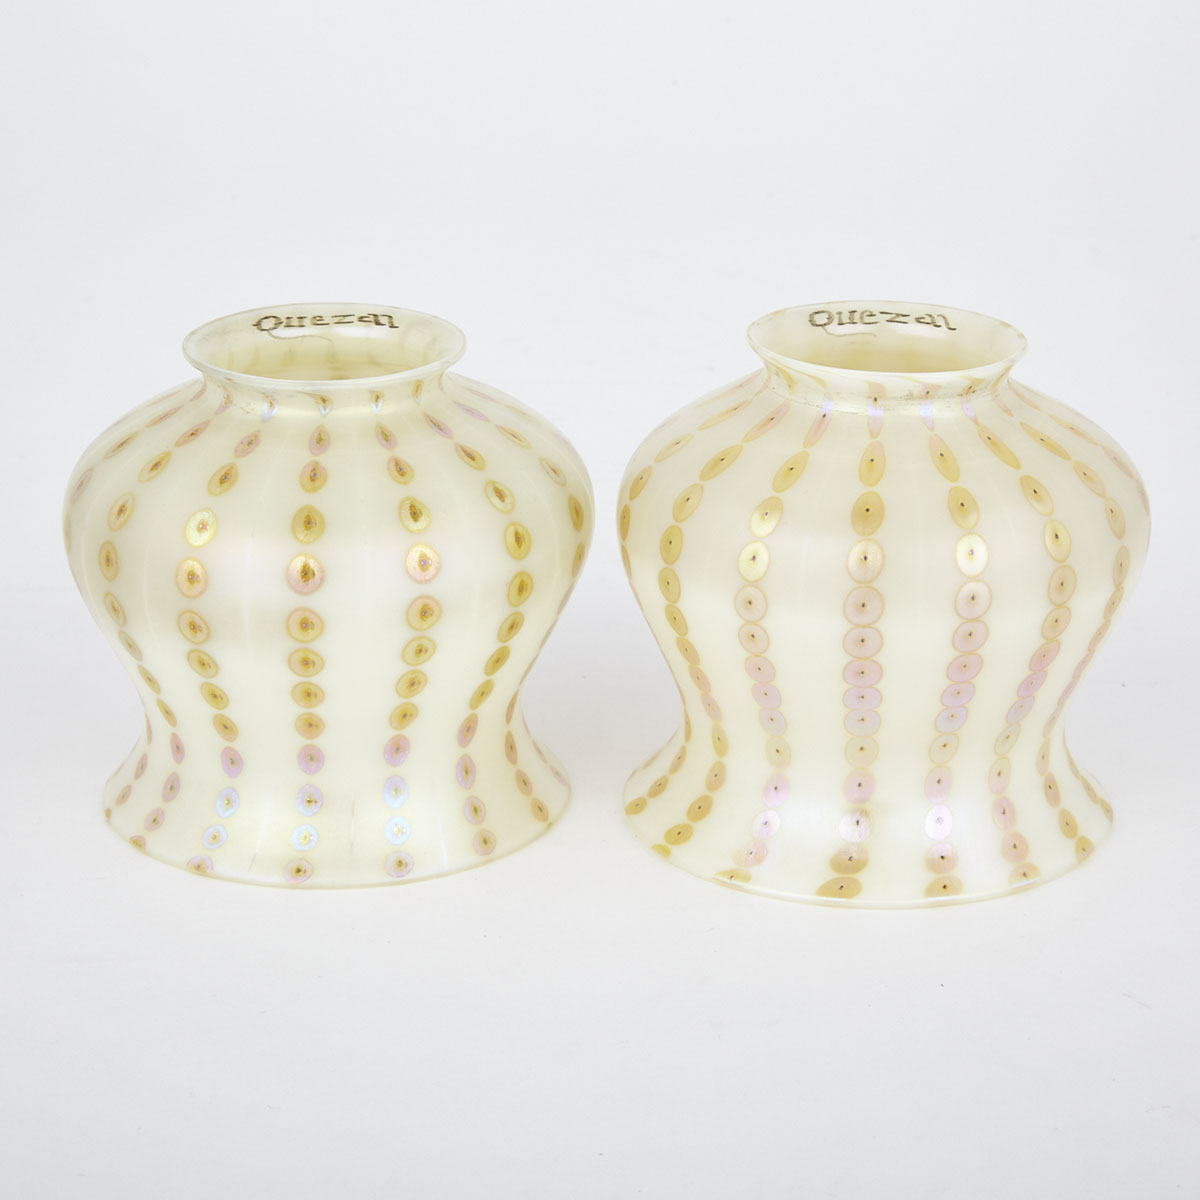 Pair of Quezal Decorated Iridescent Glass Shades, early 20th century